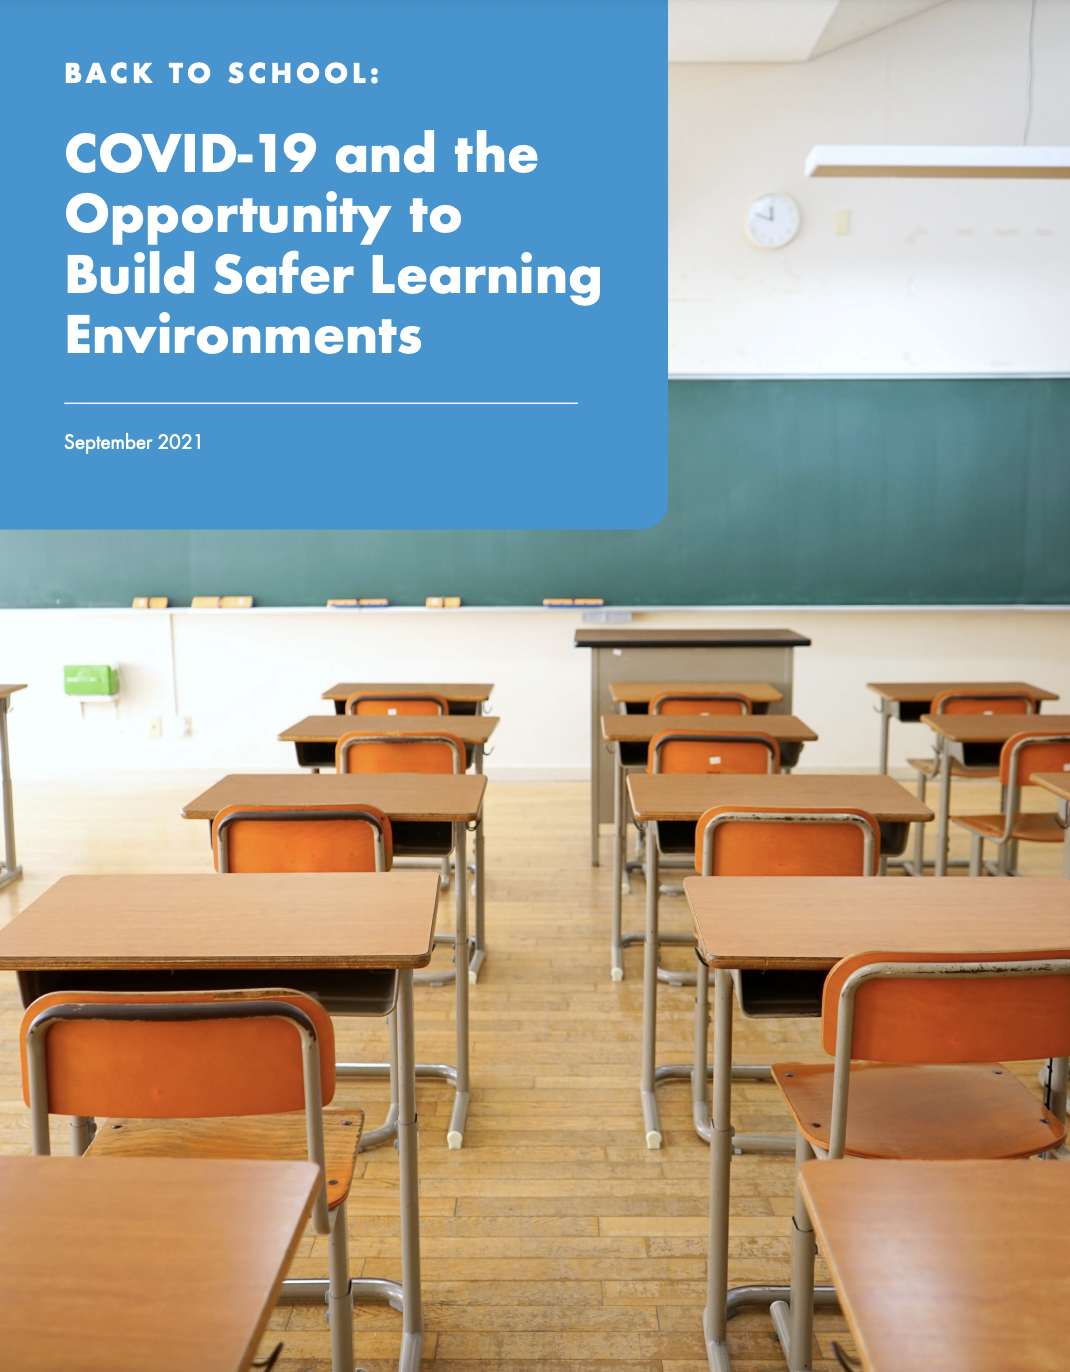 COVID-19 and the Opportunity to Build Safer Learning Environments